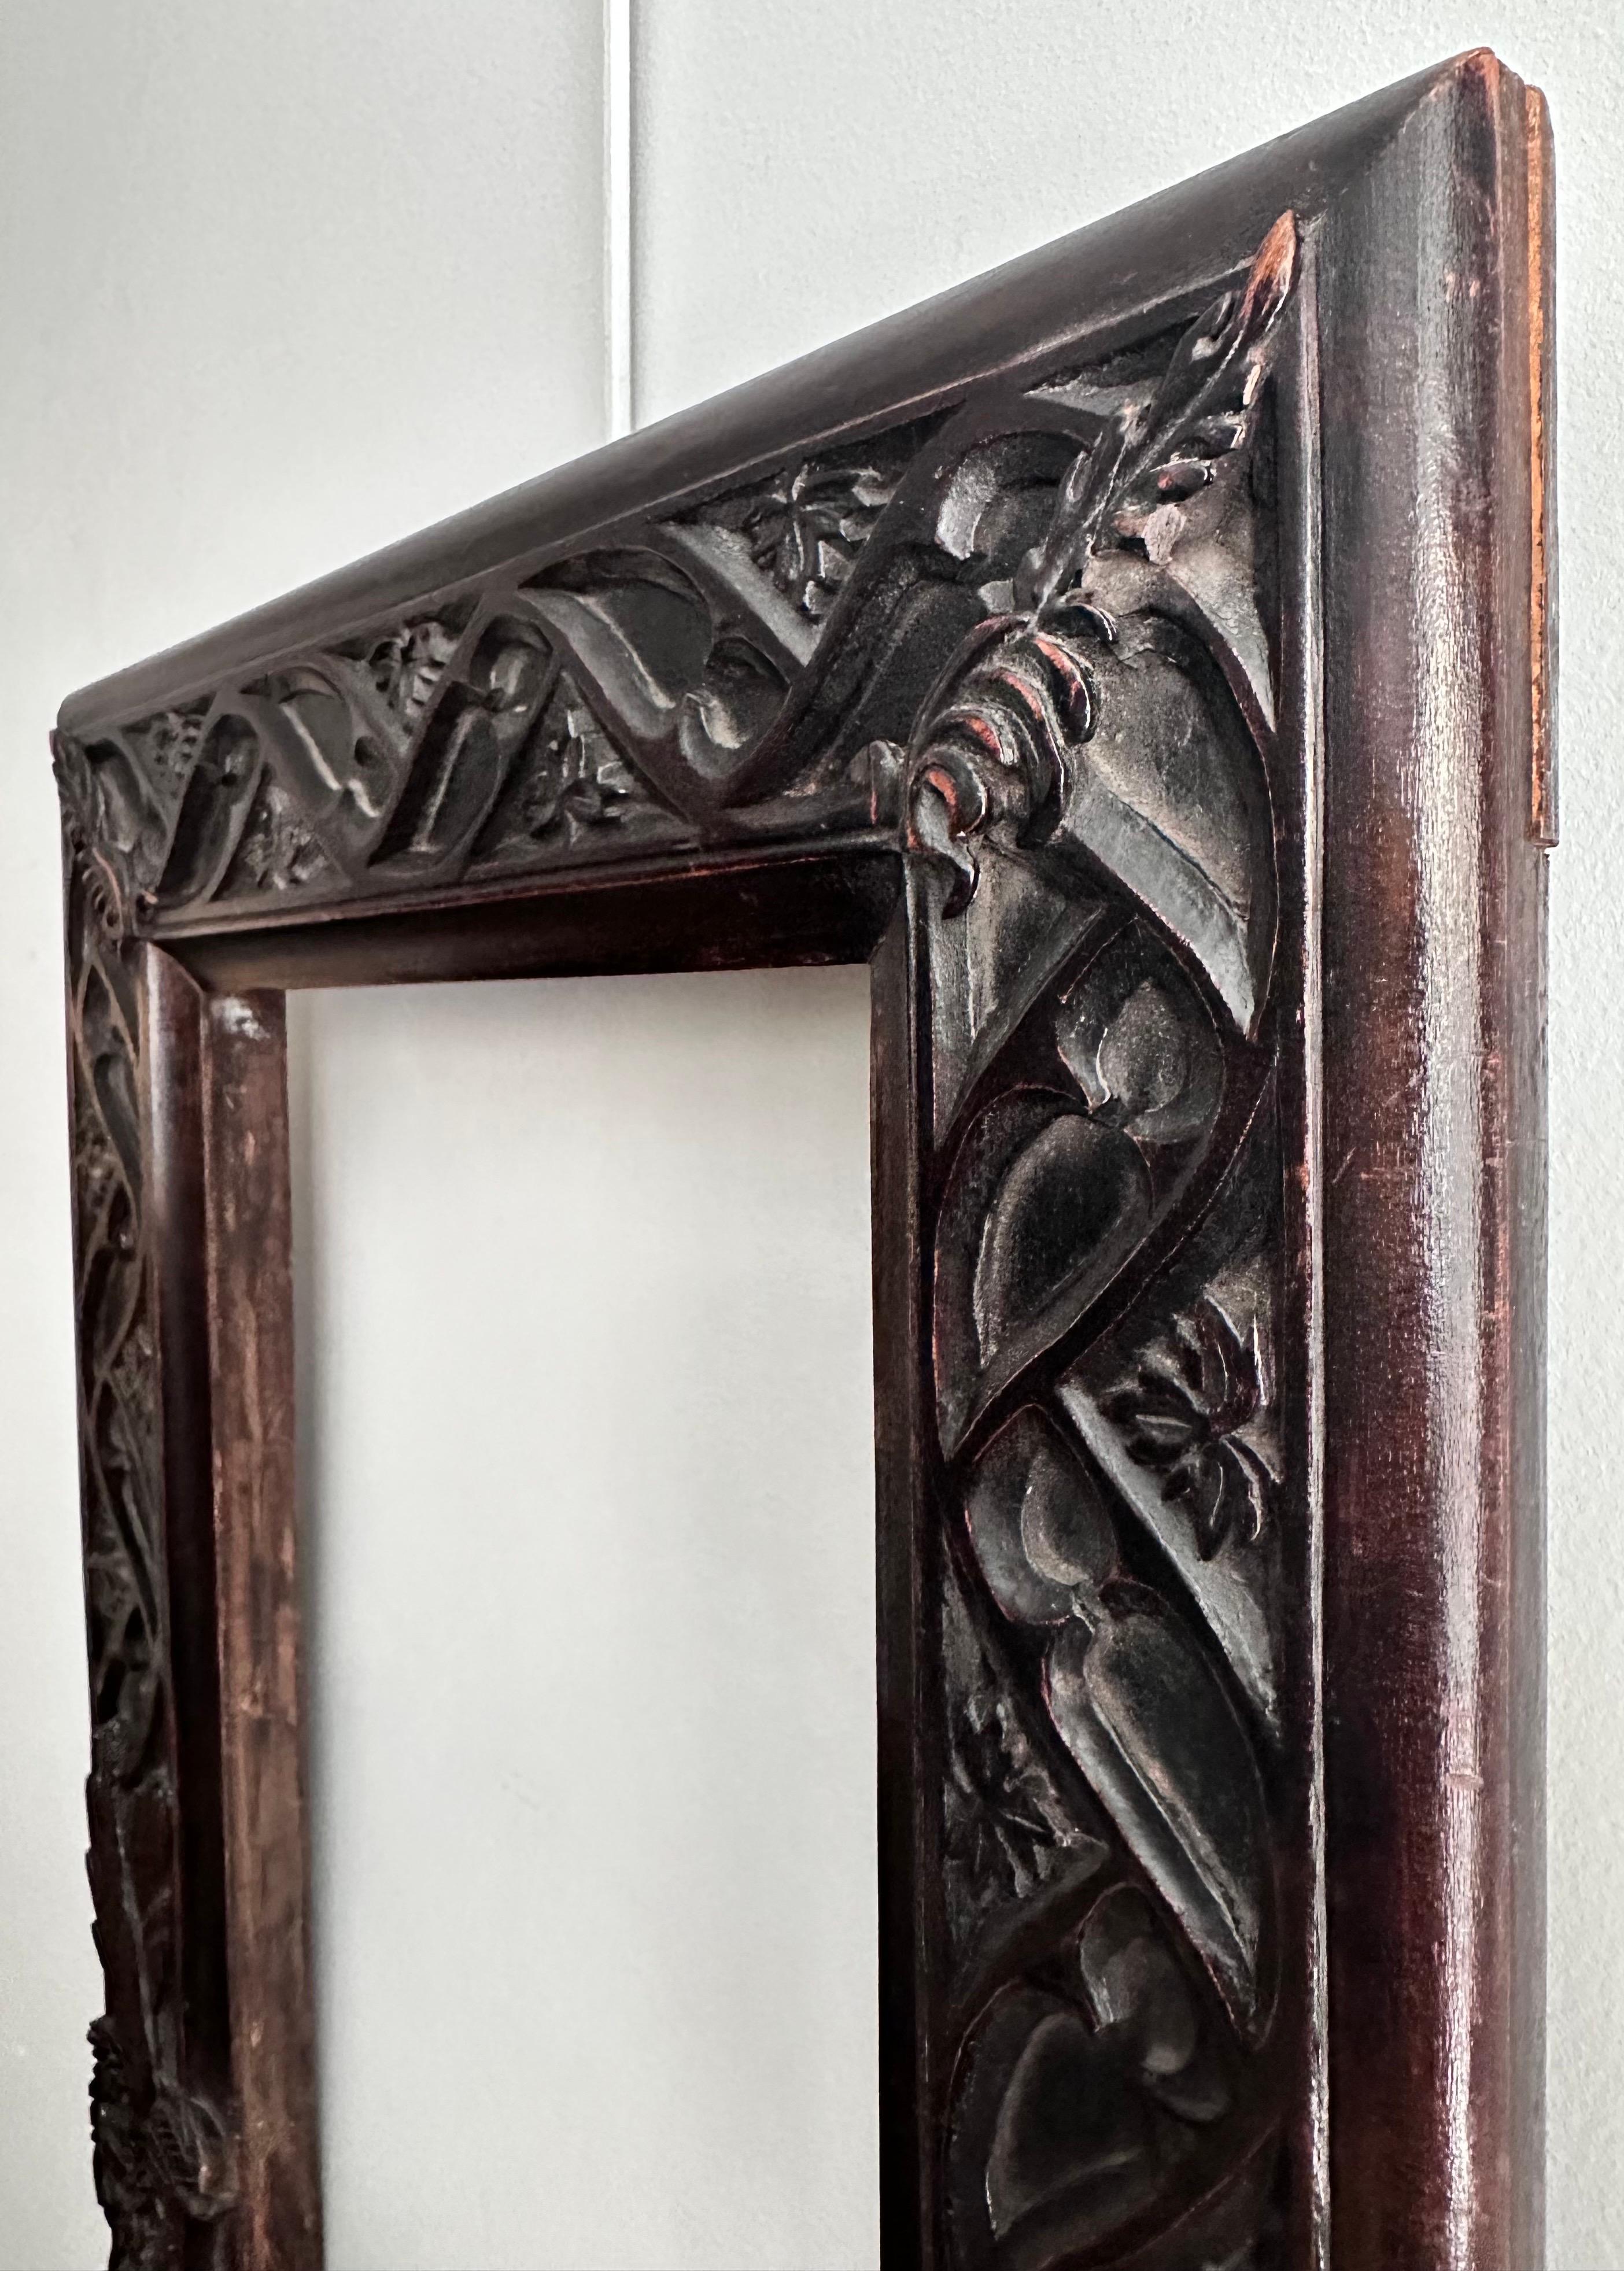 “Skull” Frame, Carved Wood 19th 1860-1880 Specially Created for Dürer Engraving  For Sale 2